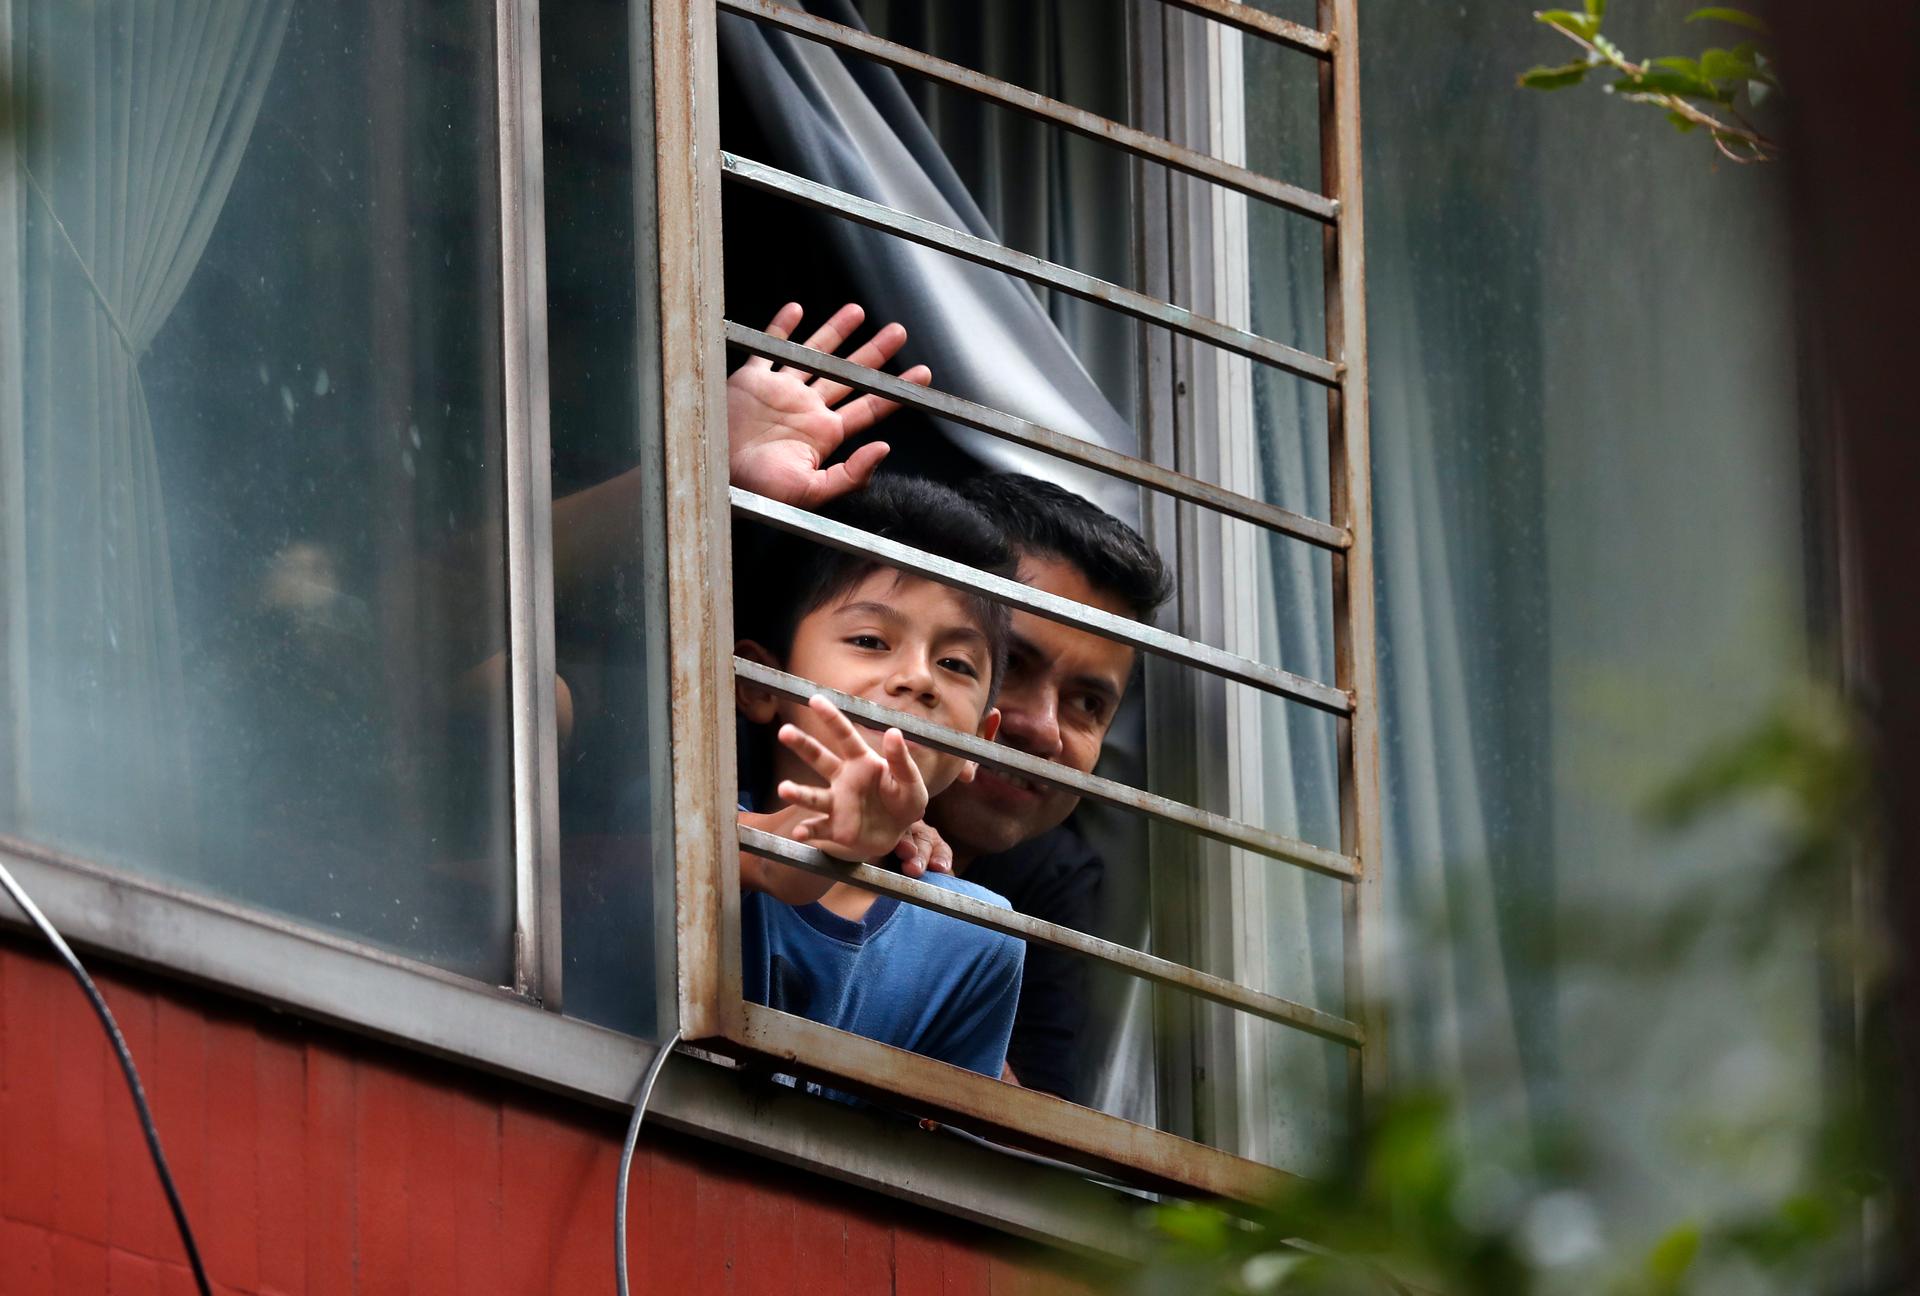 Residents wave from an apartment as Percibald García reads children's books aloud outside the high-rise buildings in the Tlatelolco housing complex, in Mexico City, Mexico, on July 18, 2020.